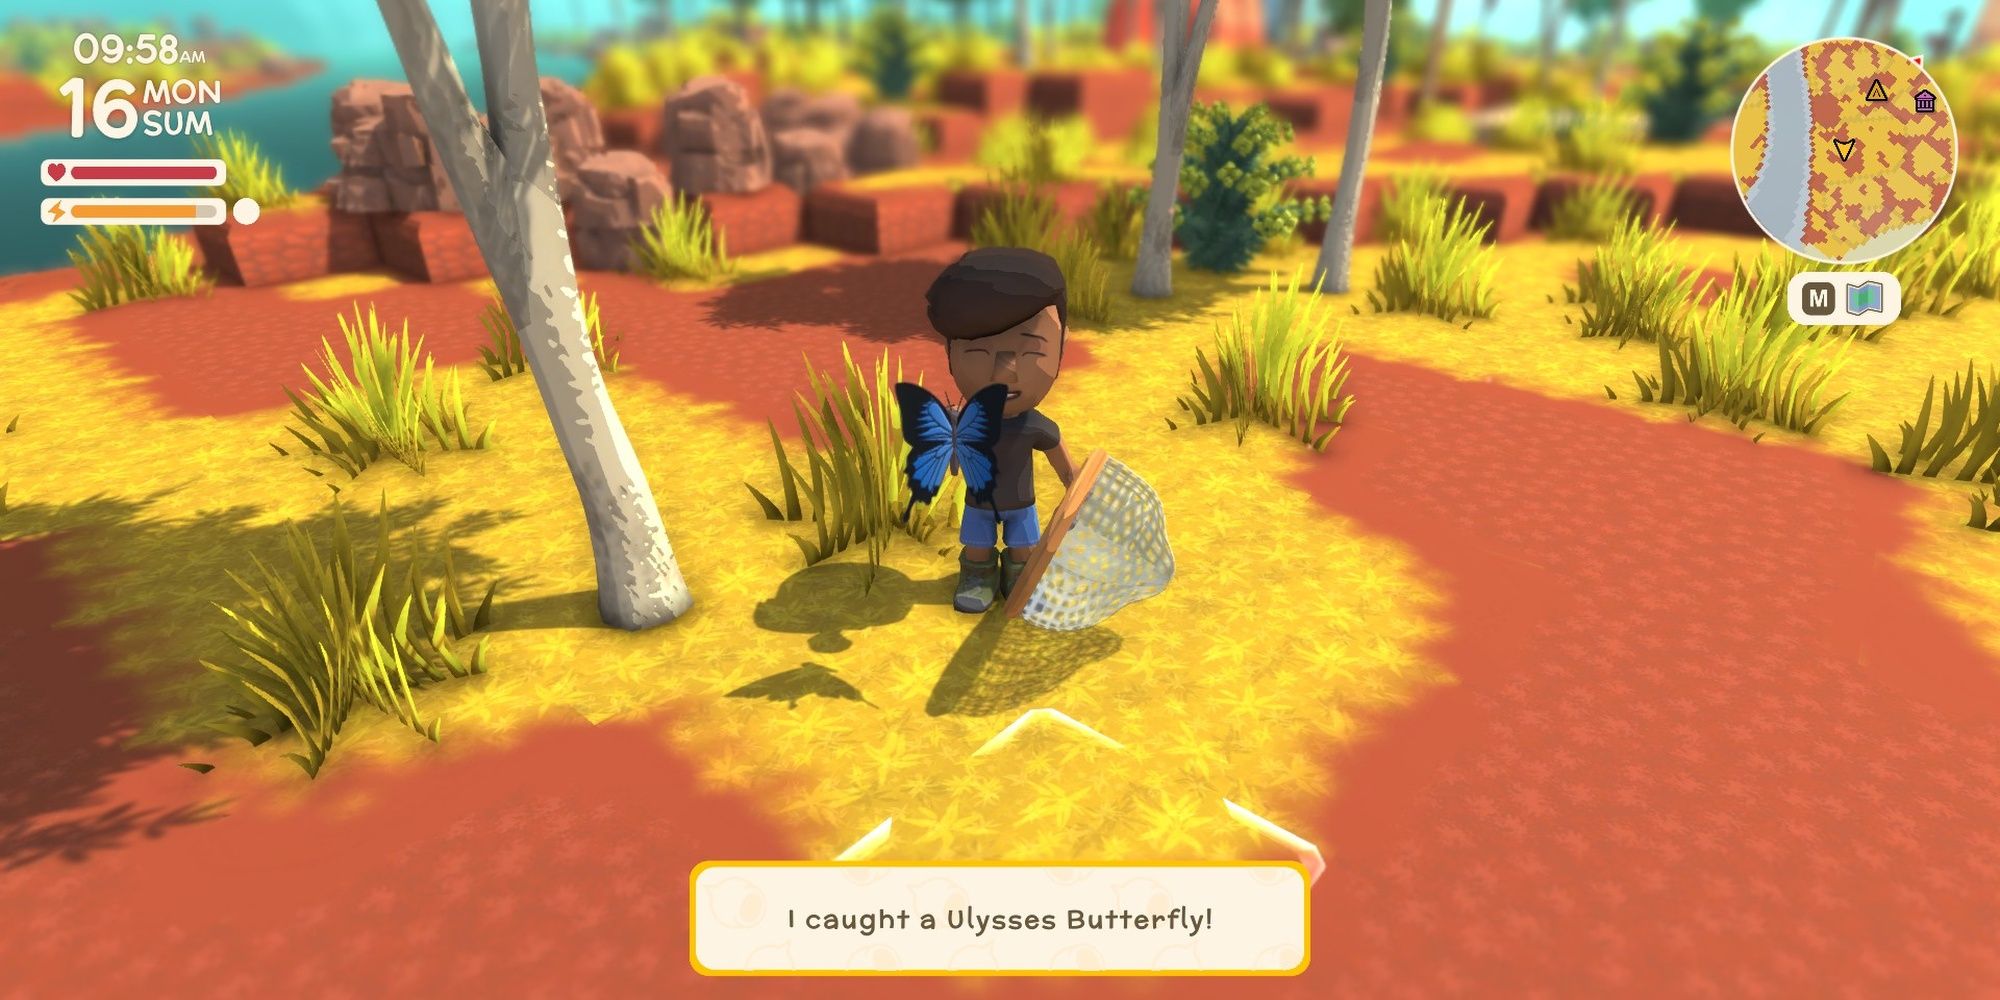 Catching a Ulysses Butterfly in Dinkum